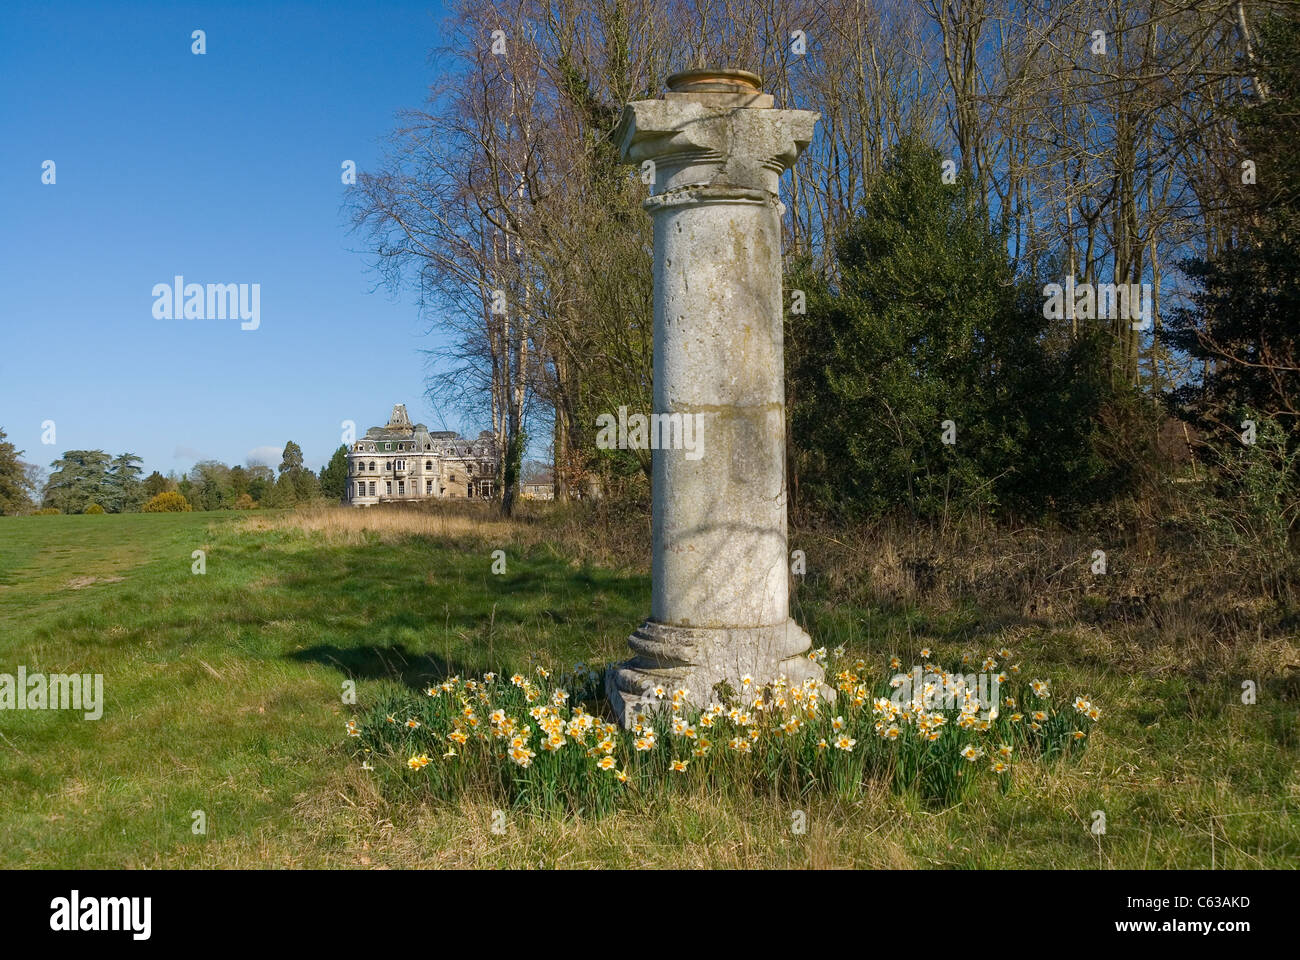 Small monument with daffodils at old renaissance period house in berkshire, england near Henley-on-Thames Stock Photo